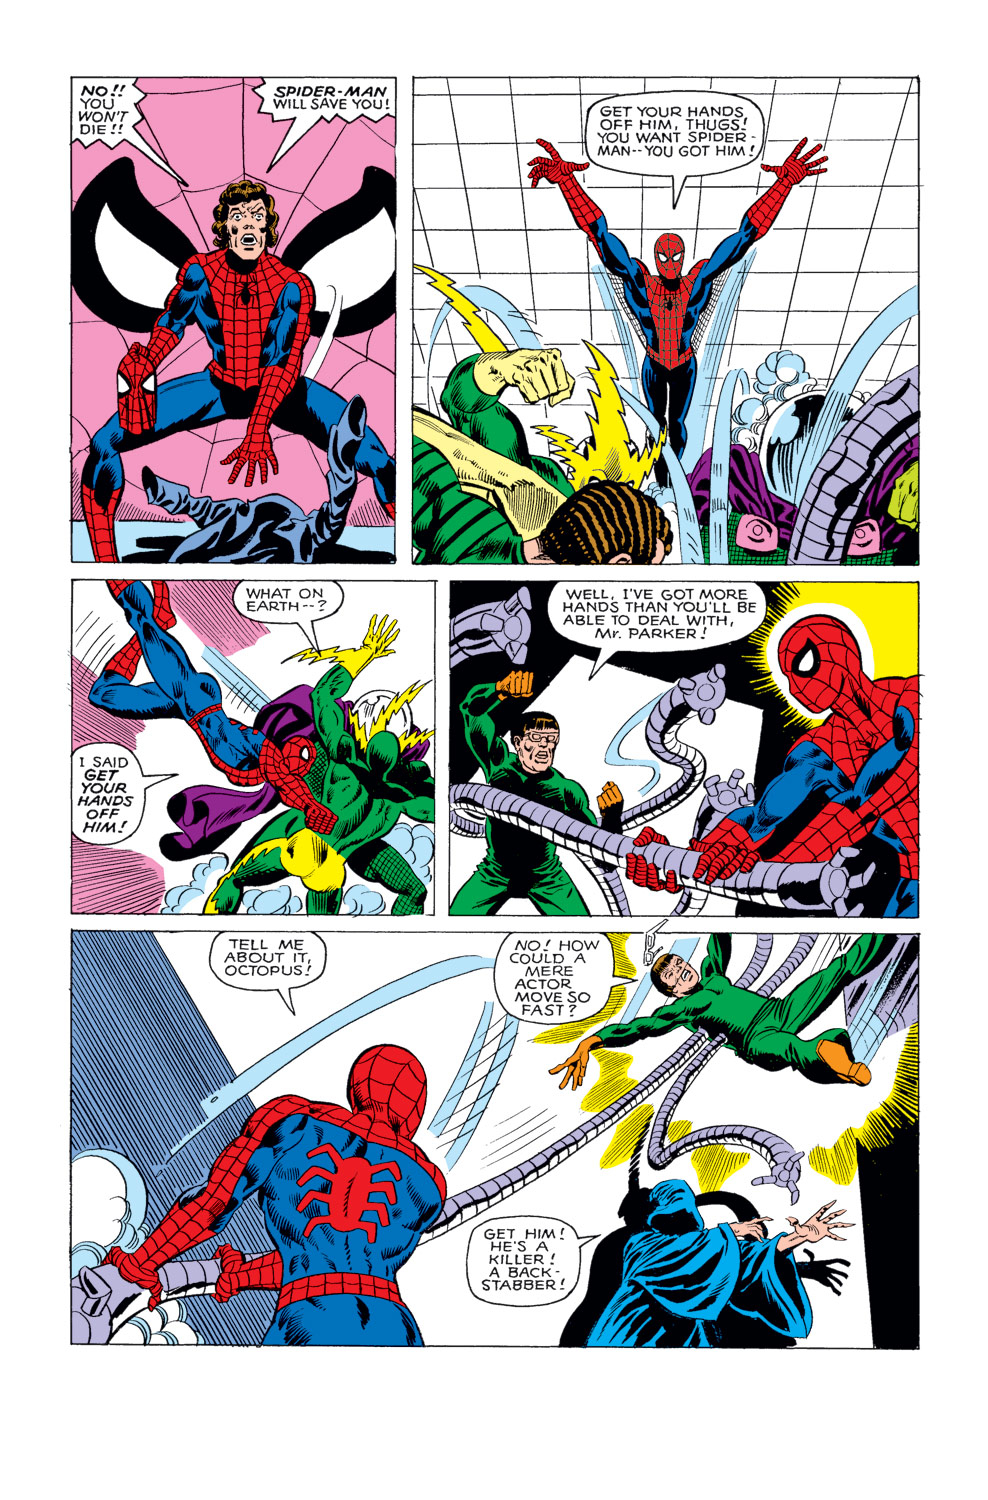 What If? (1977) issue 19 - Spider-Man had never become a crimefighter - Page 32